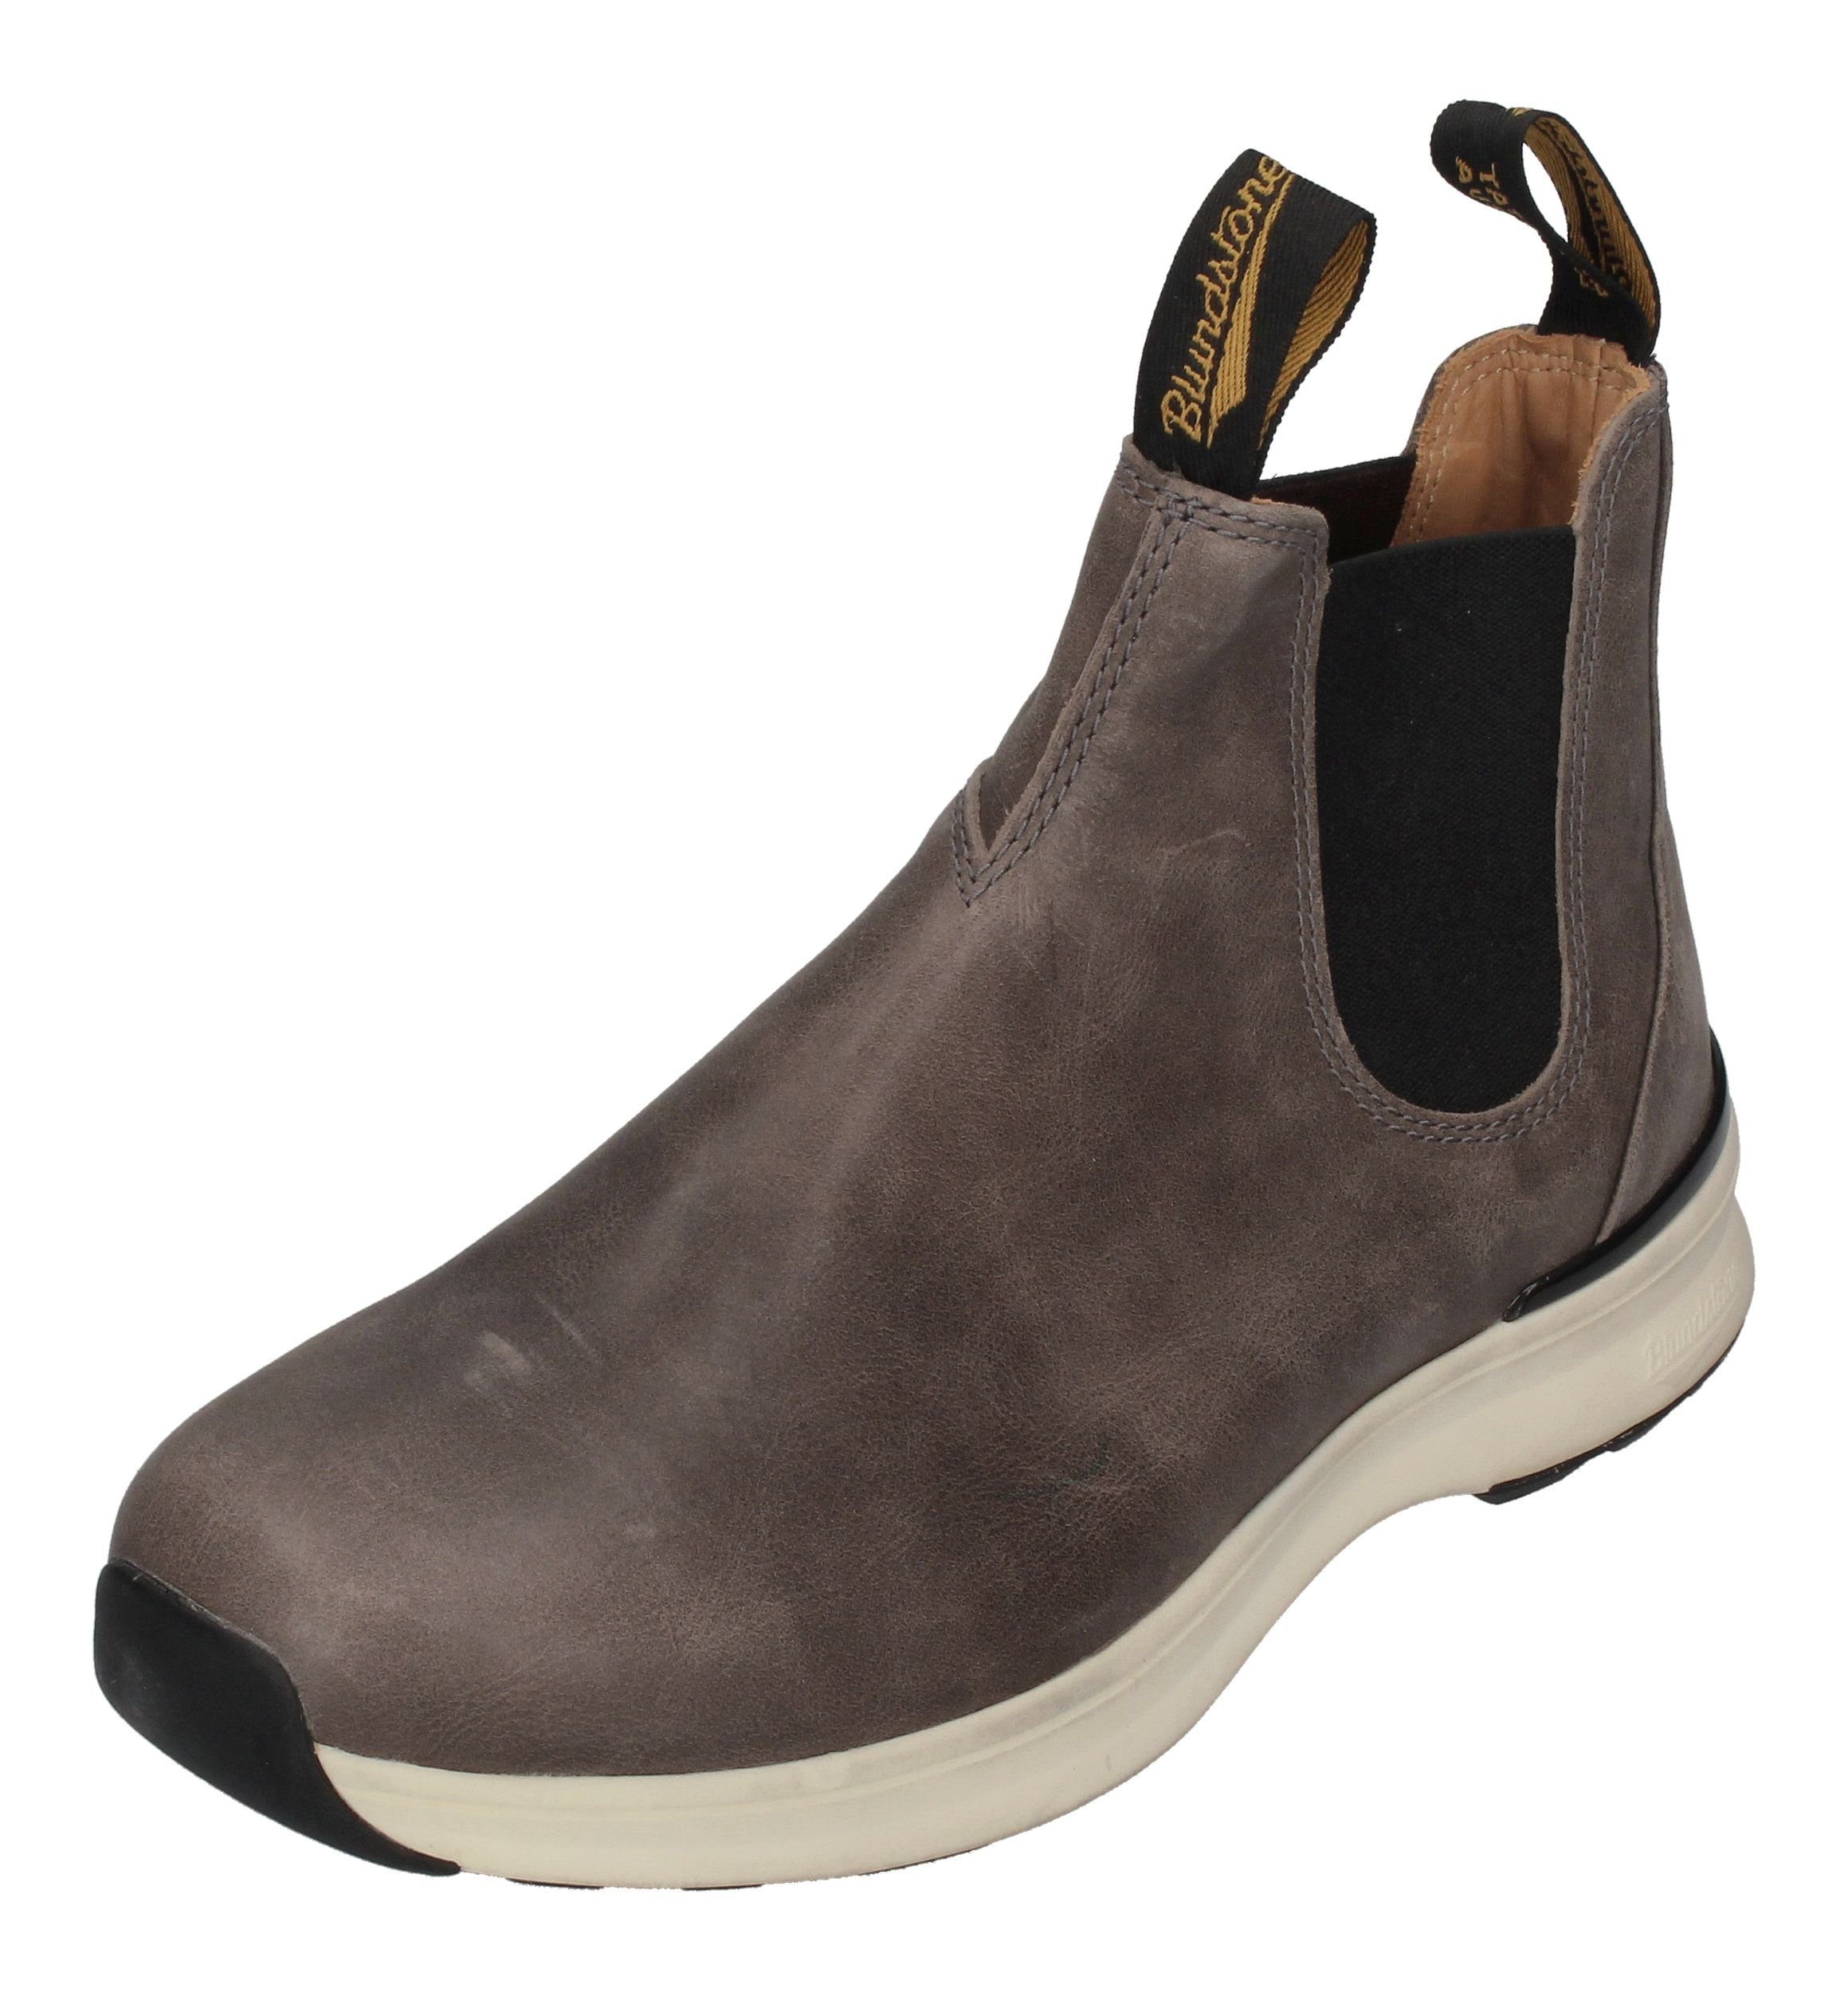 Series Sided Blundstone 2141 Active Dusty Elastic Grey Chelseaboots